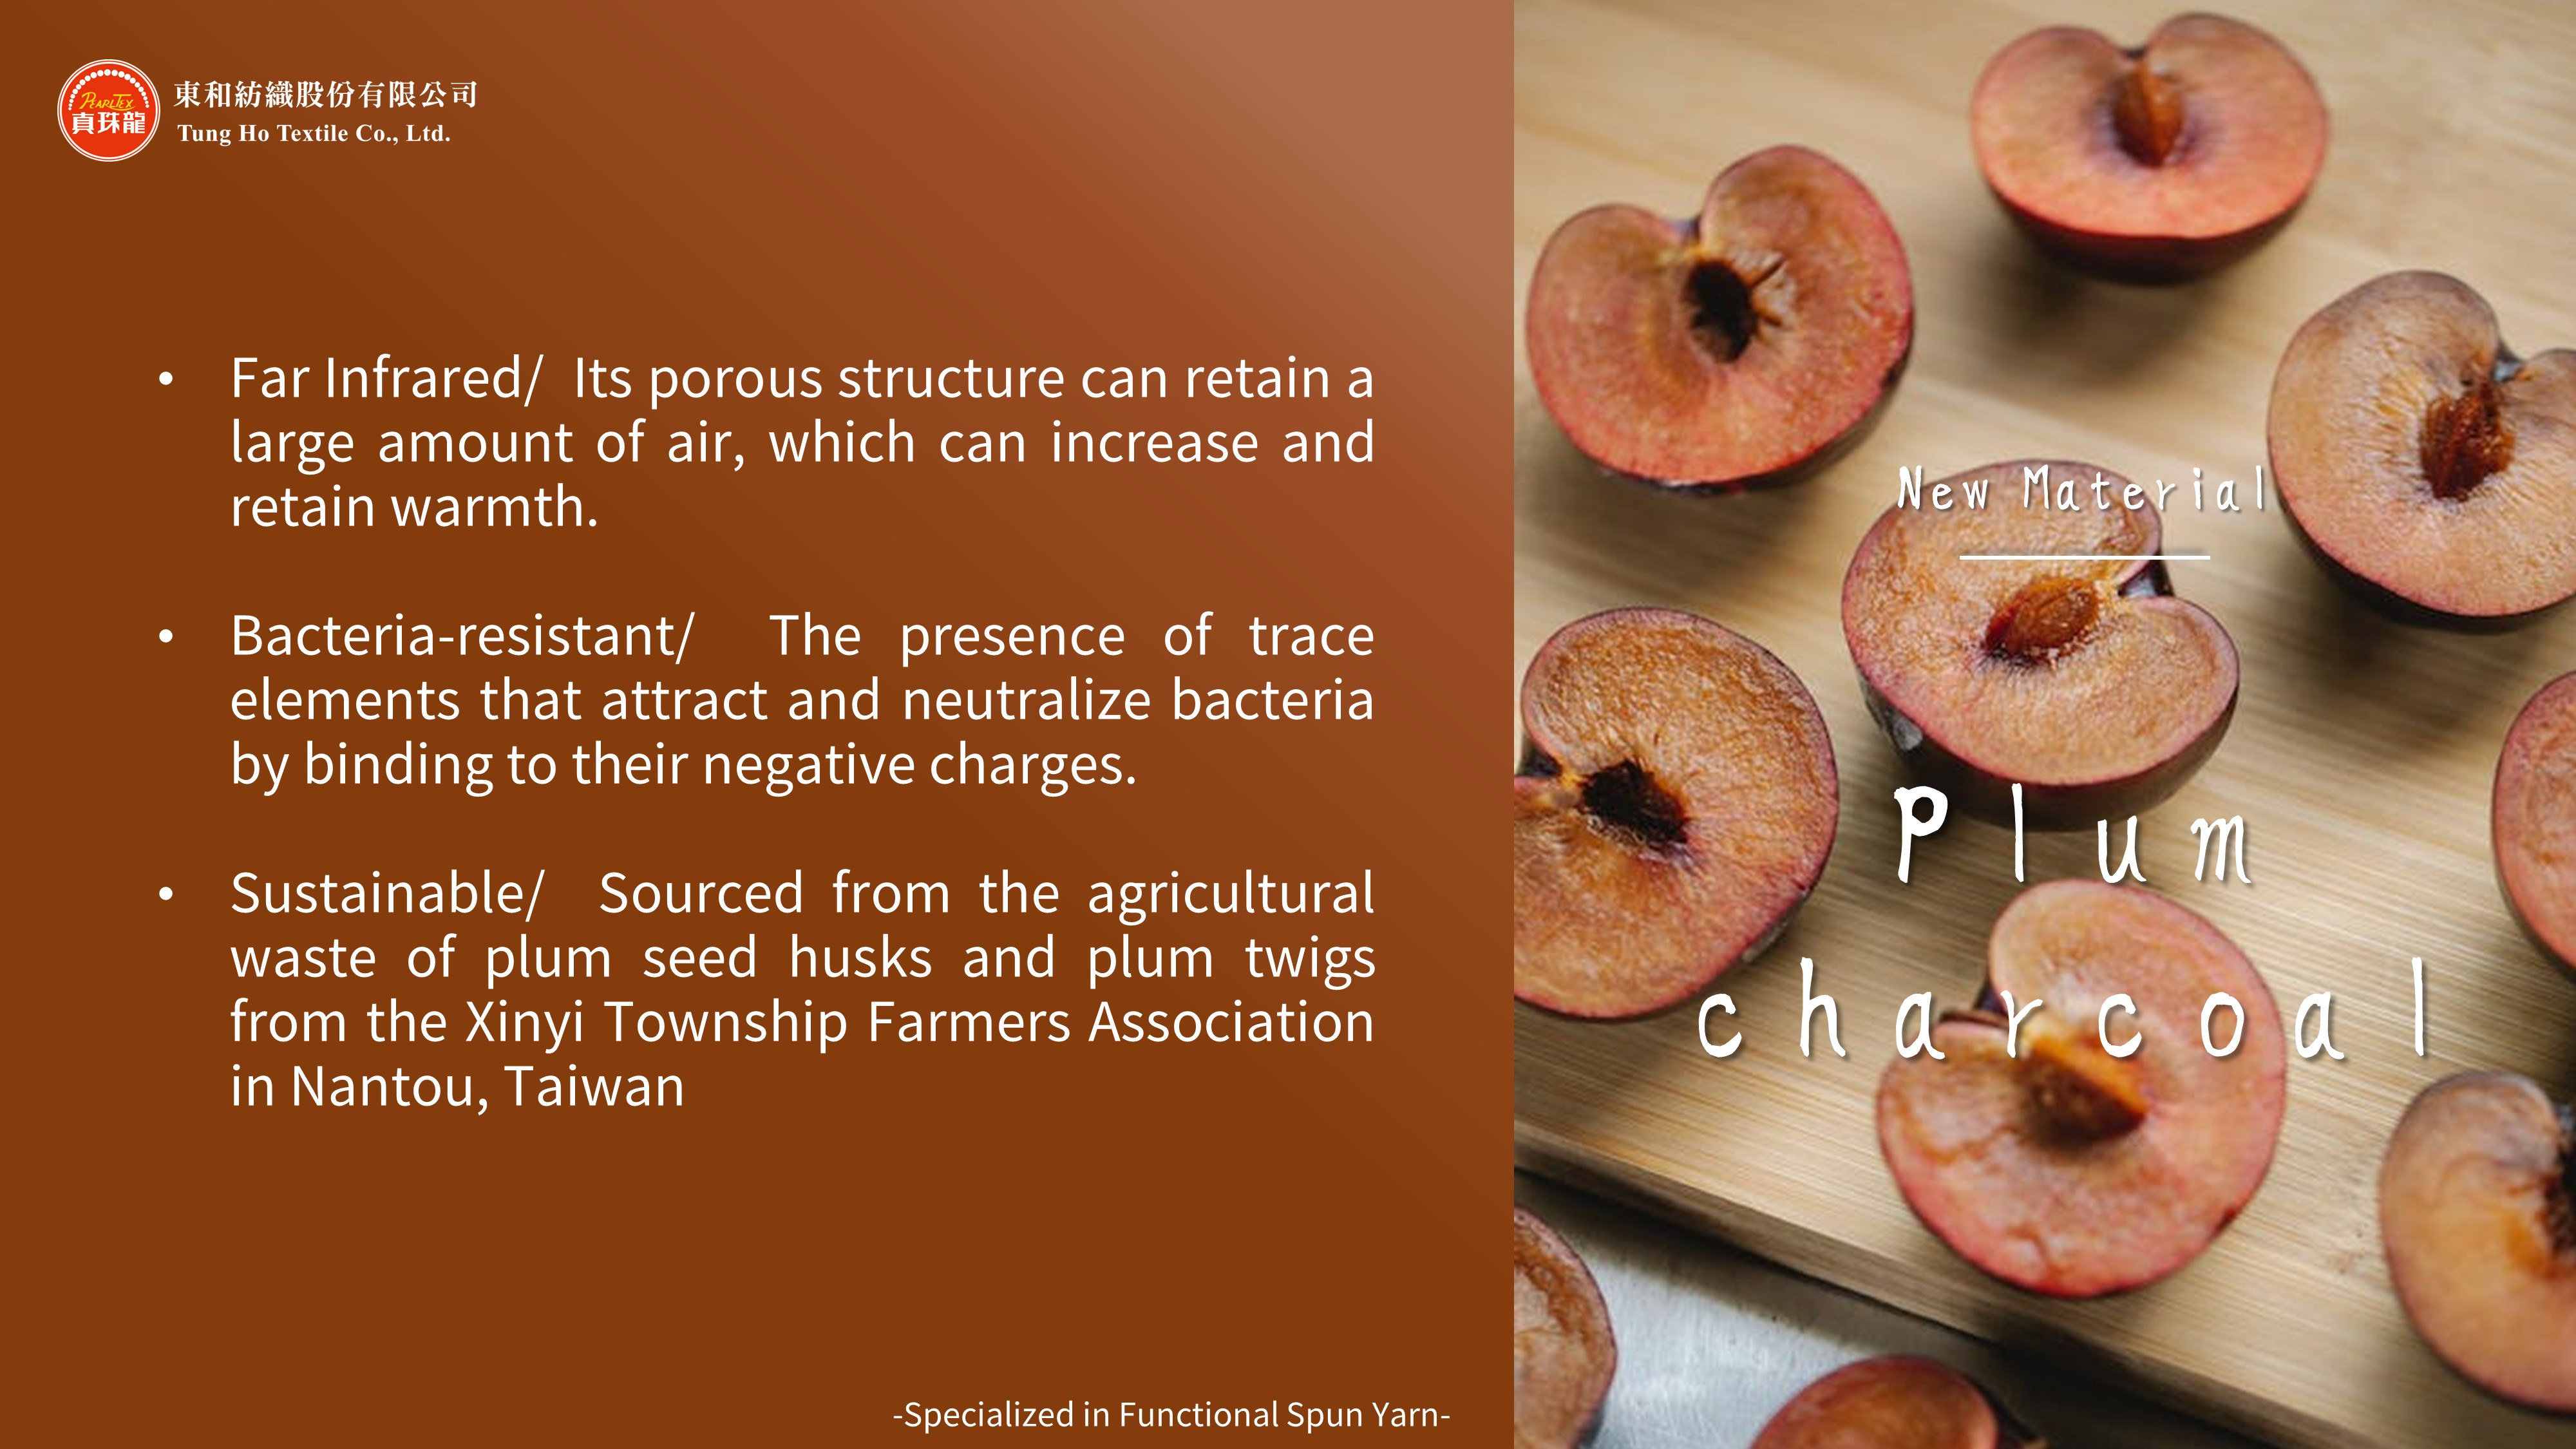 A new agricultural waste revolution, and plum seeds are the latest trend!